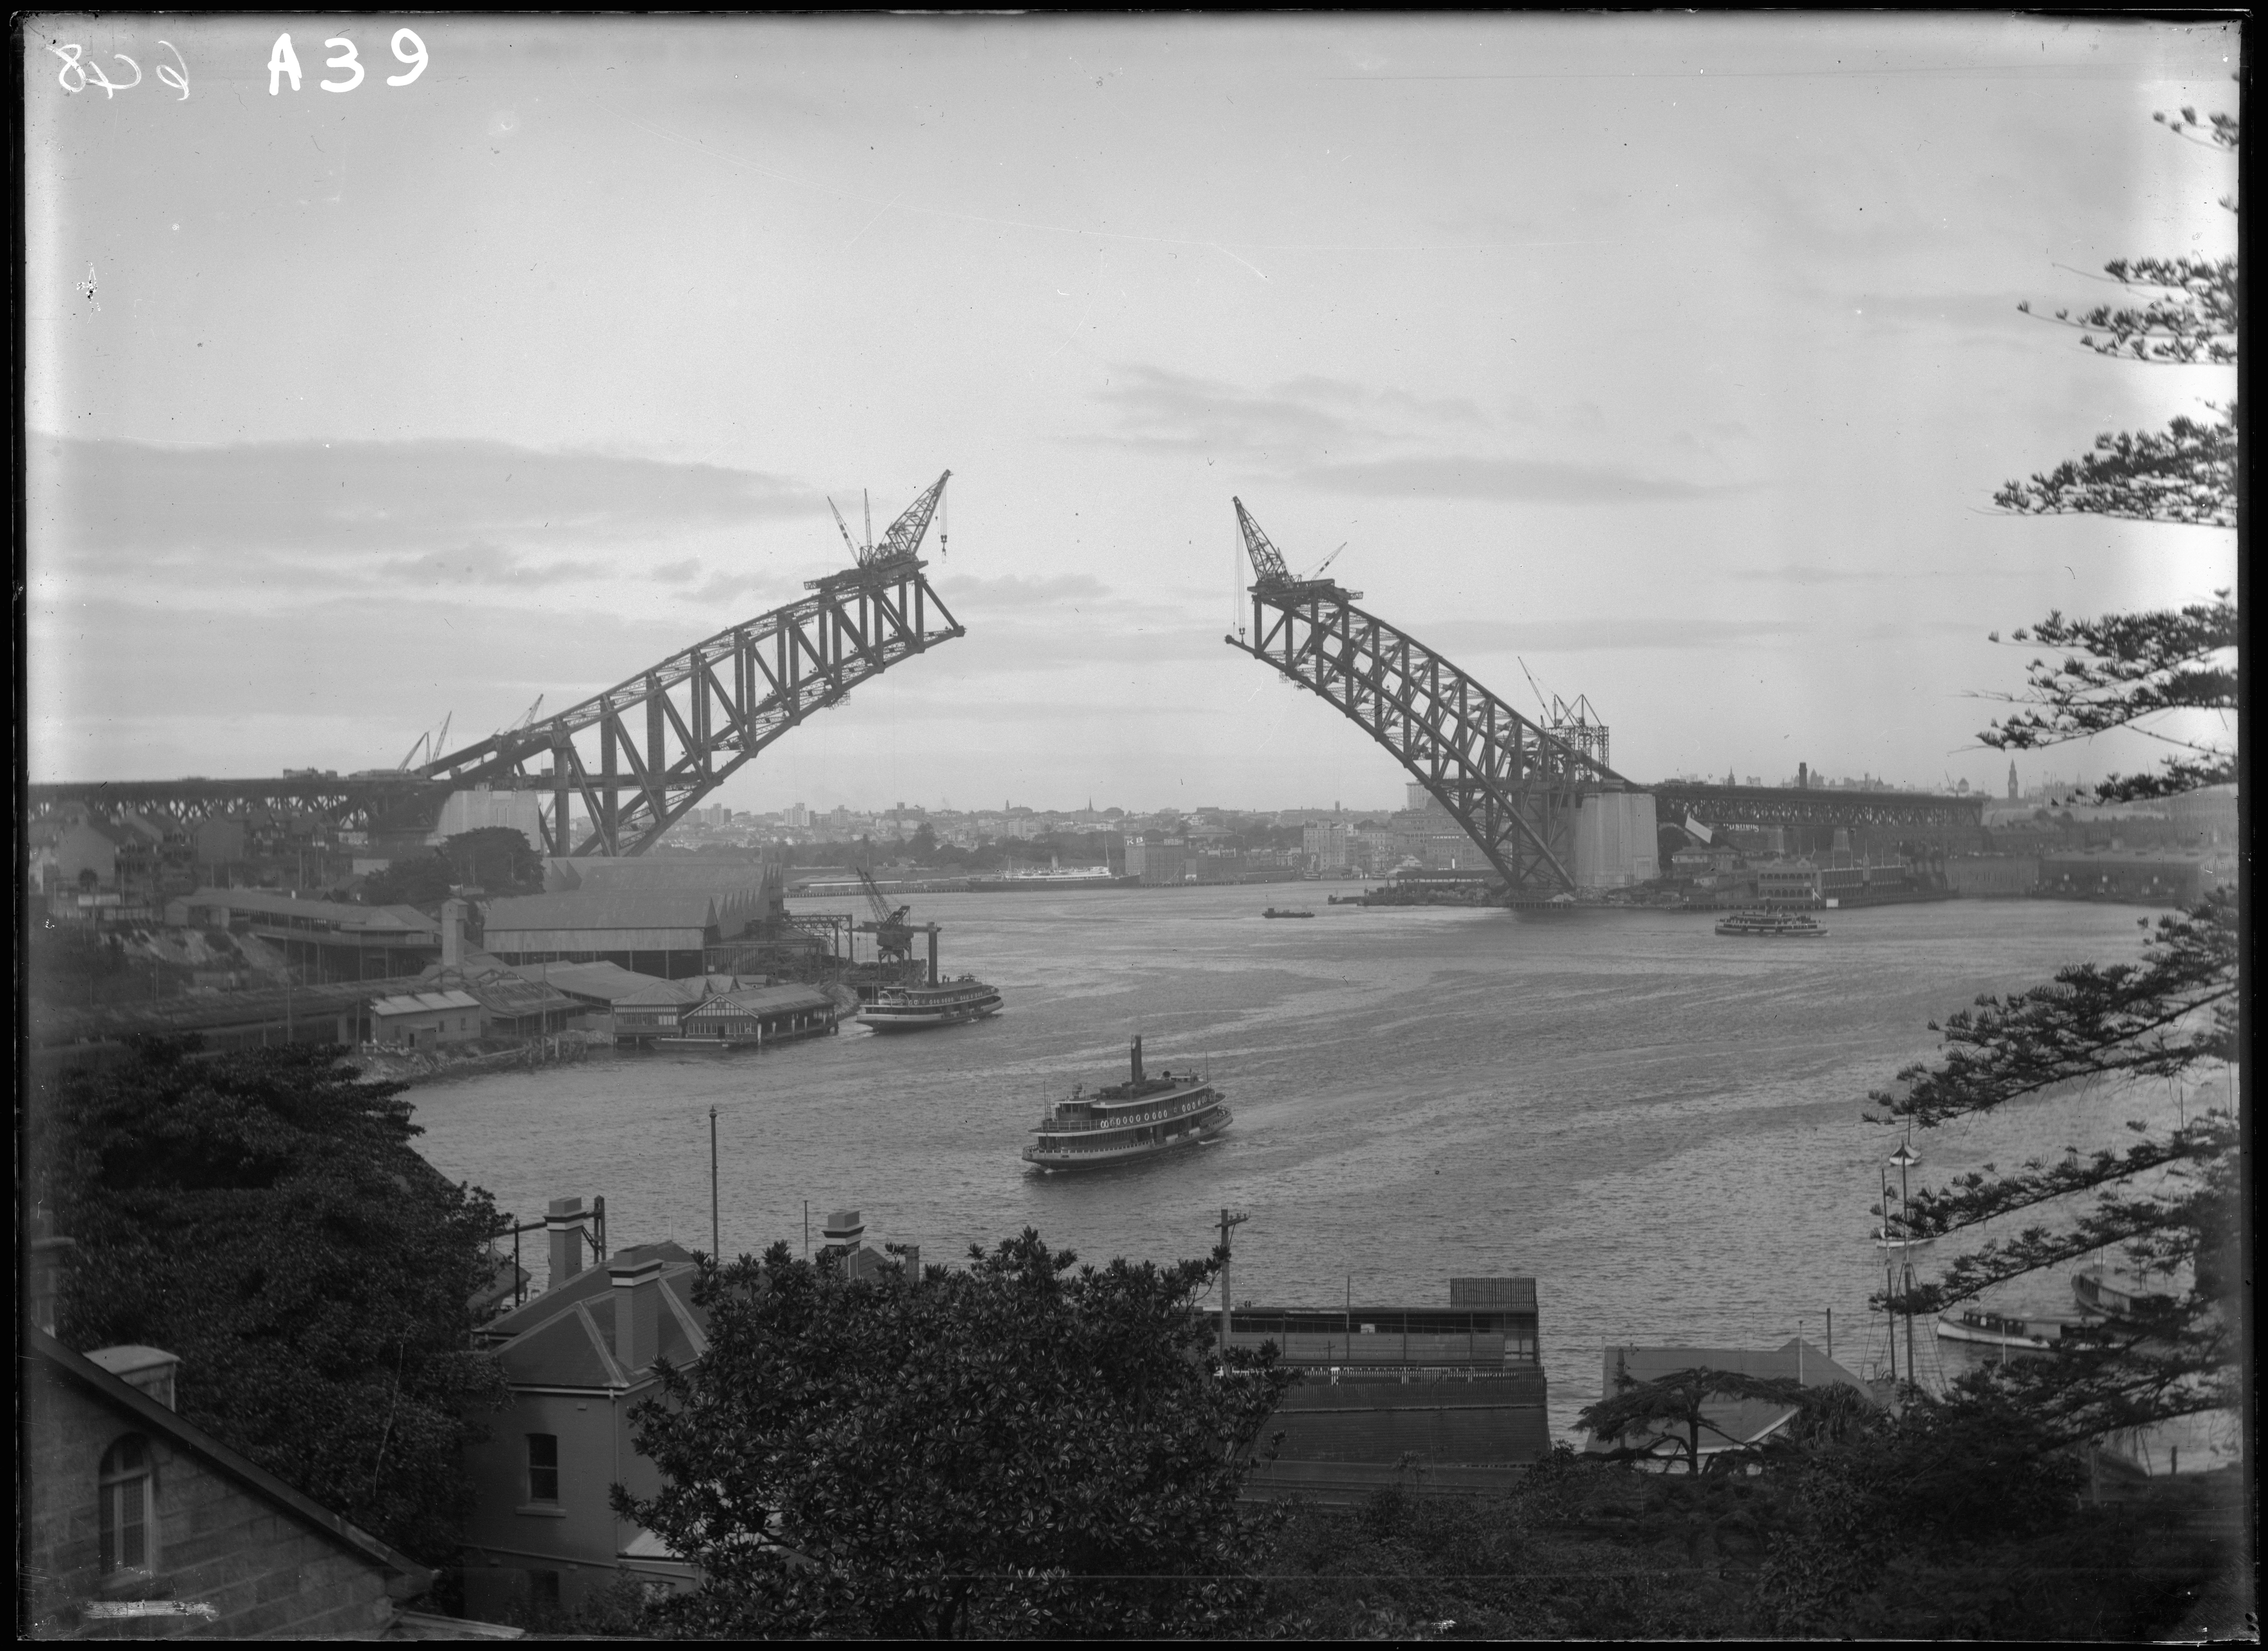 Image 1 of 1 - A black and white image of the construction of the Sydney Harbour Bridge